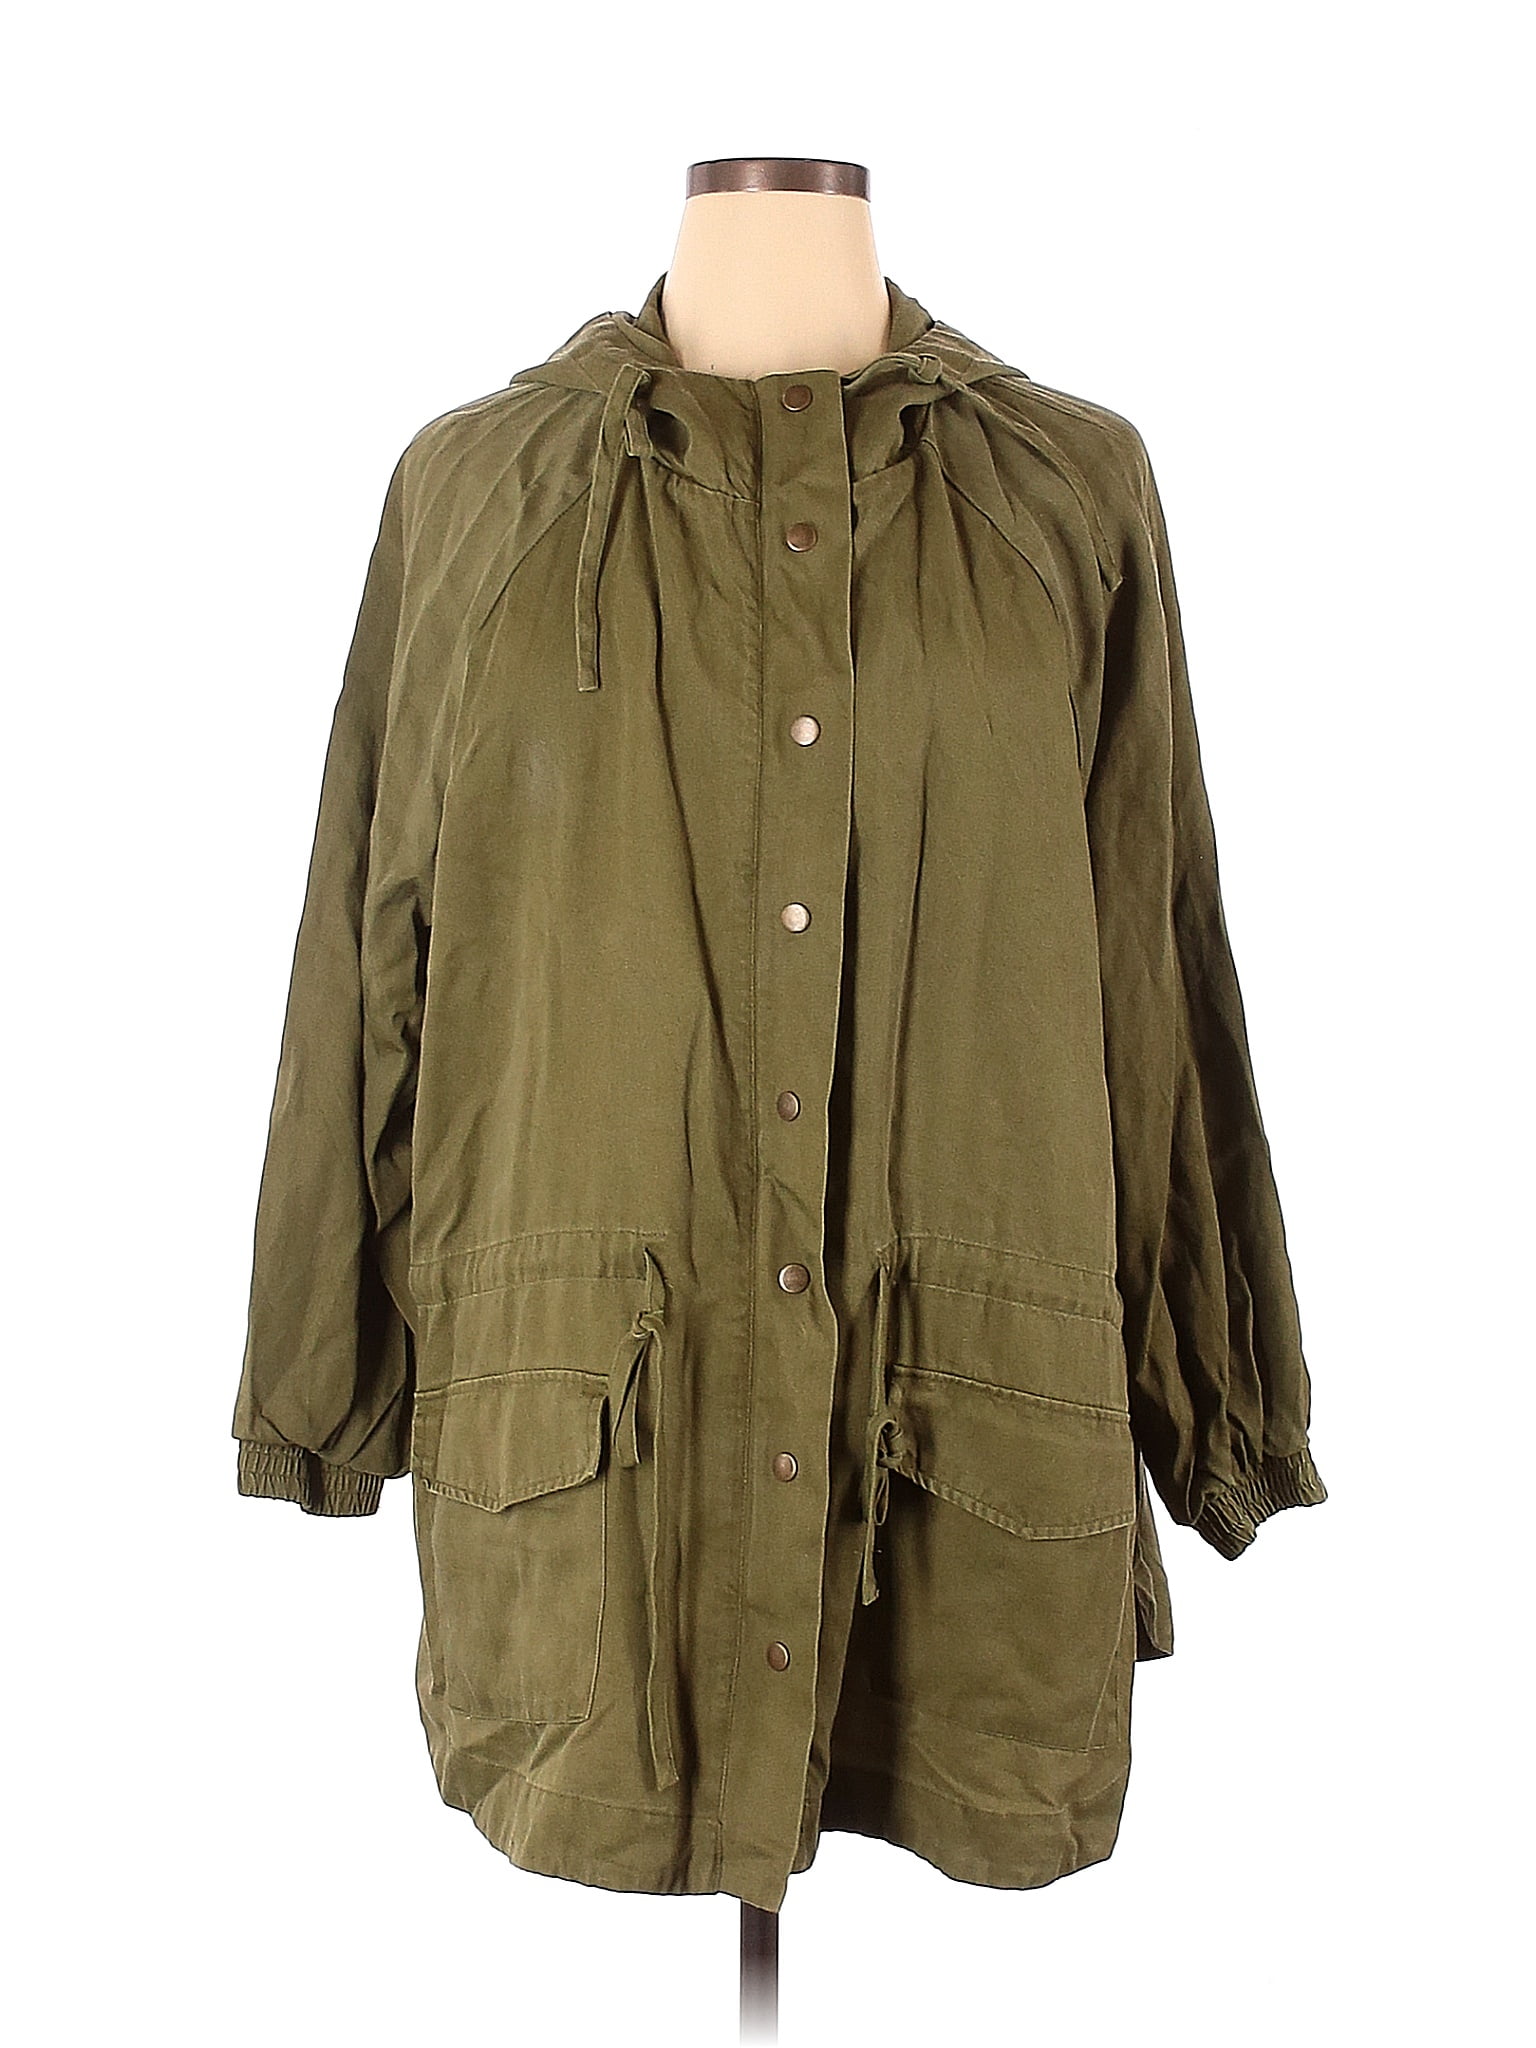 Jane and Delancey 100% Lyocell Solid Green Jacket Size 1X (Plus) - 57% ...